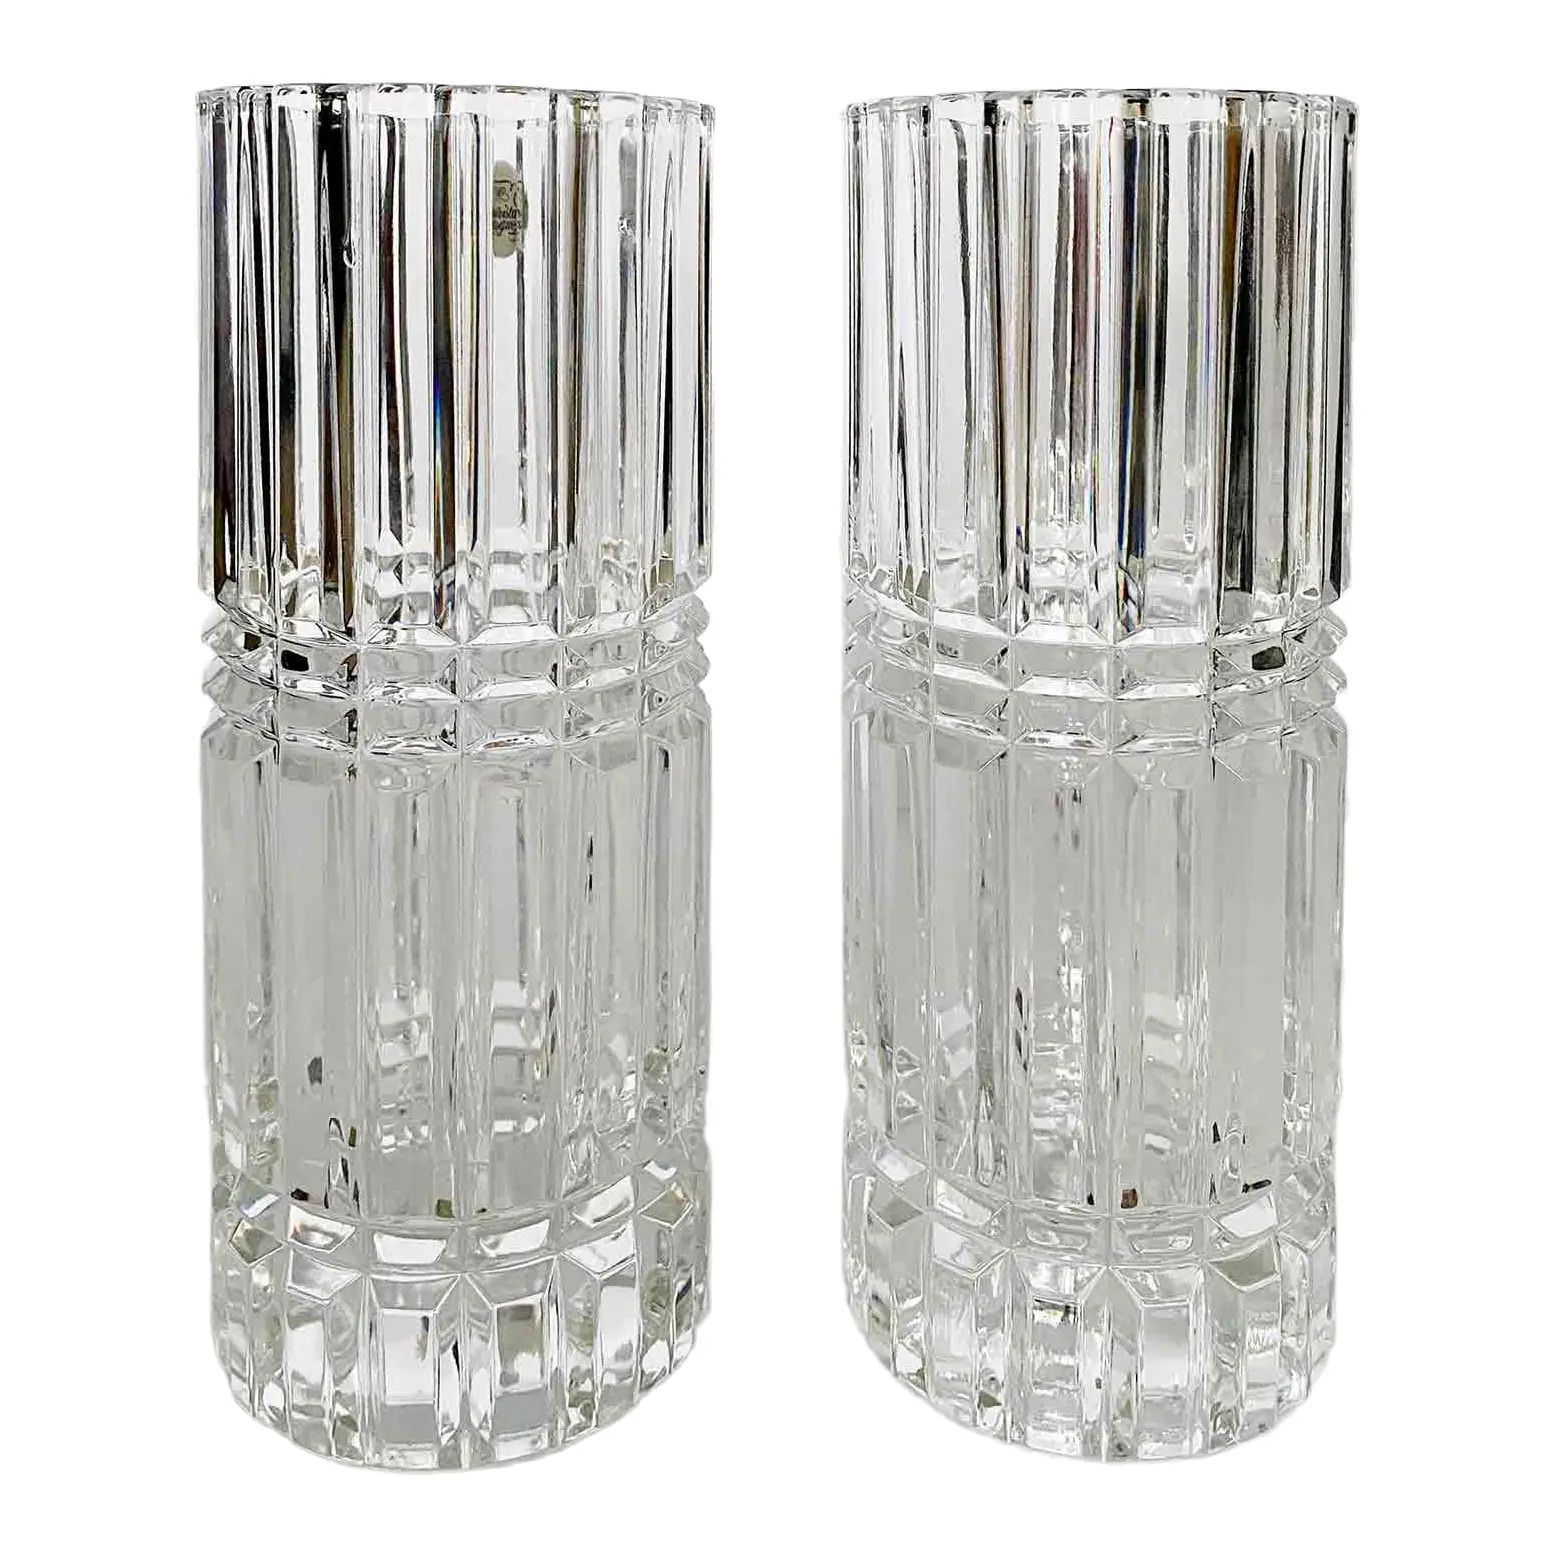 Mid Century French Cut Glass Lead Crystal Cylindrical Vases - a Pair | Chairish